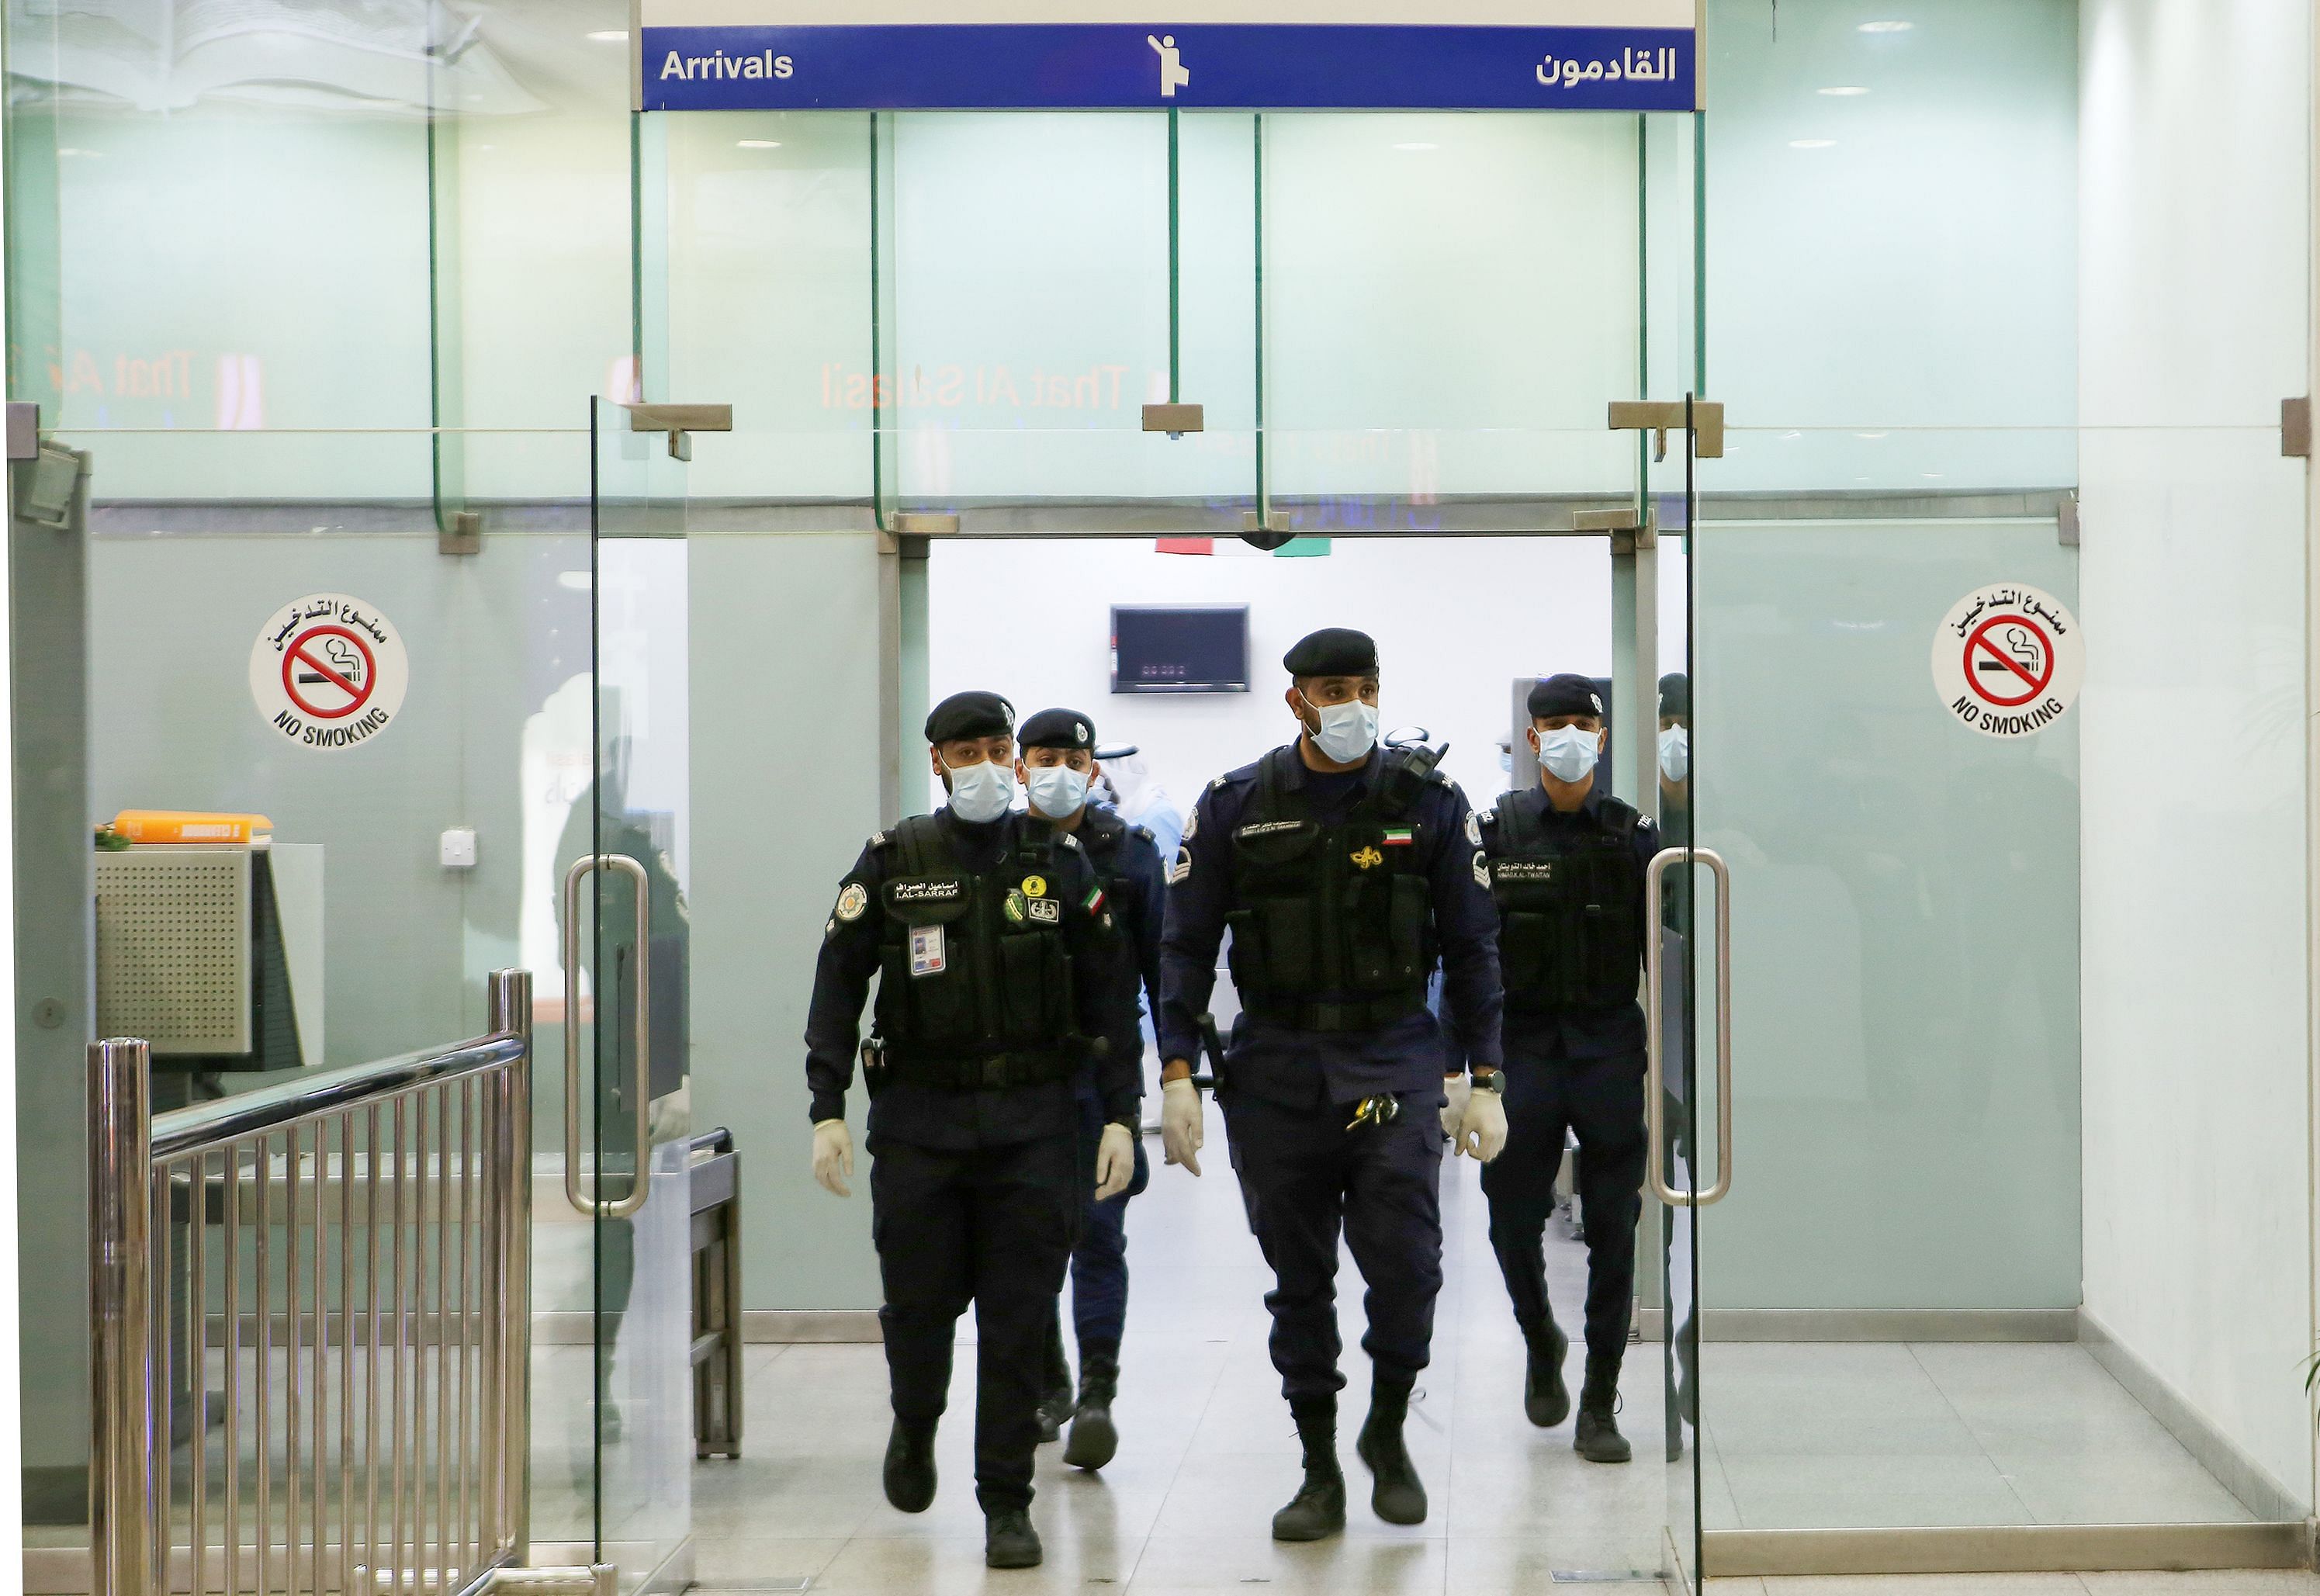 Kuwaiti policemen wearing protective masks wait at Sheikh Saad Airport in Kuwait City, on February 22, 2020, before transferring Kuwaitis arriving from Iran to a hospital to be tested for coronavirus. (Credit: AFP Photo)